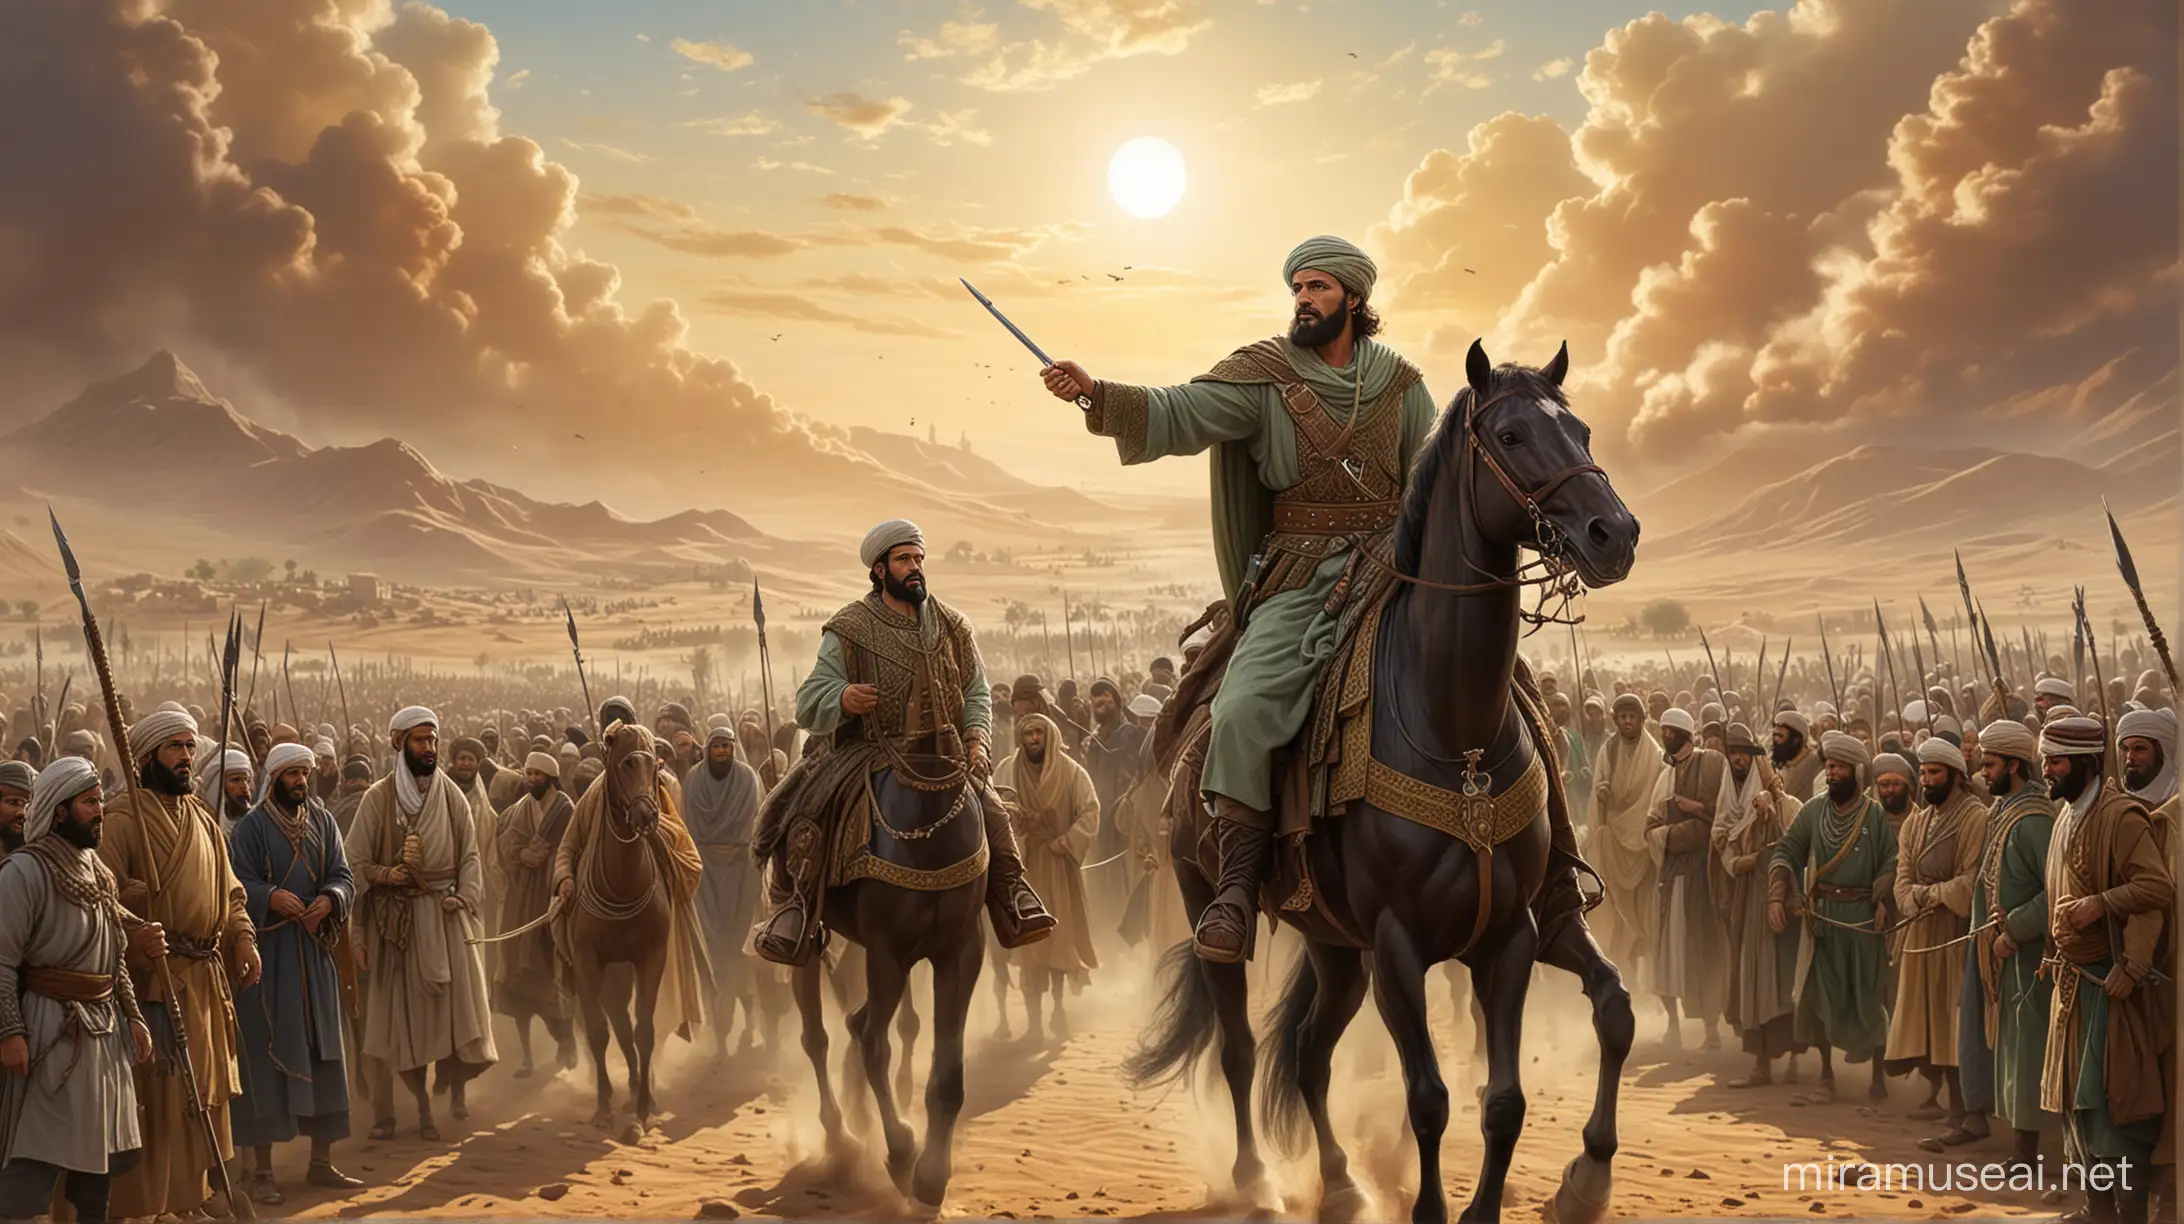 Create a detailed illustration of Khalid ibn al-Walid, a significant figure in Islamic history, Accepting Islam . His attire and surroundings should reflect the historical and cultural context of his time. He is depicted as a strong and noble warrior, commanding the forces of Prophet Muhammad and those of his immediate successors of the Rashidun Caliphate. 